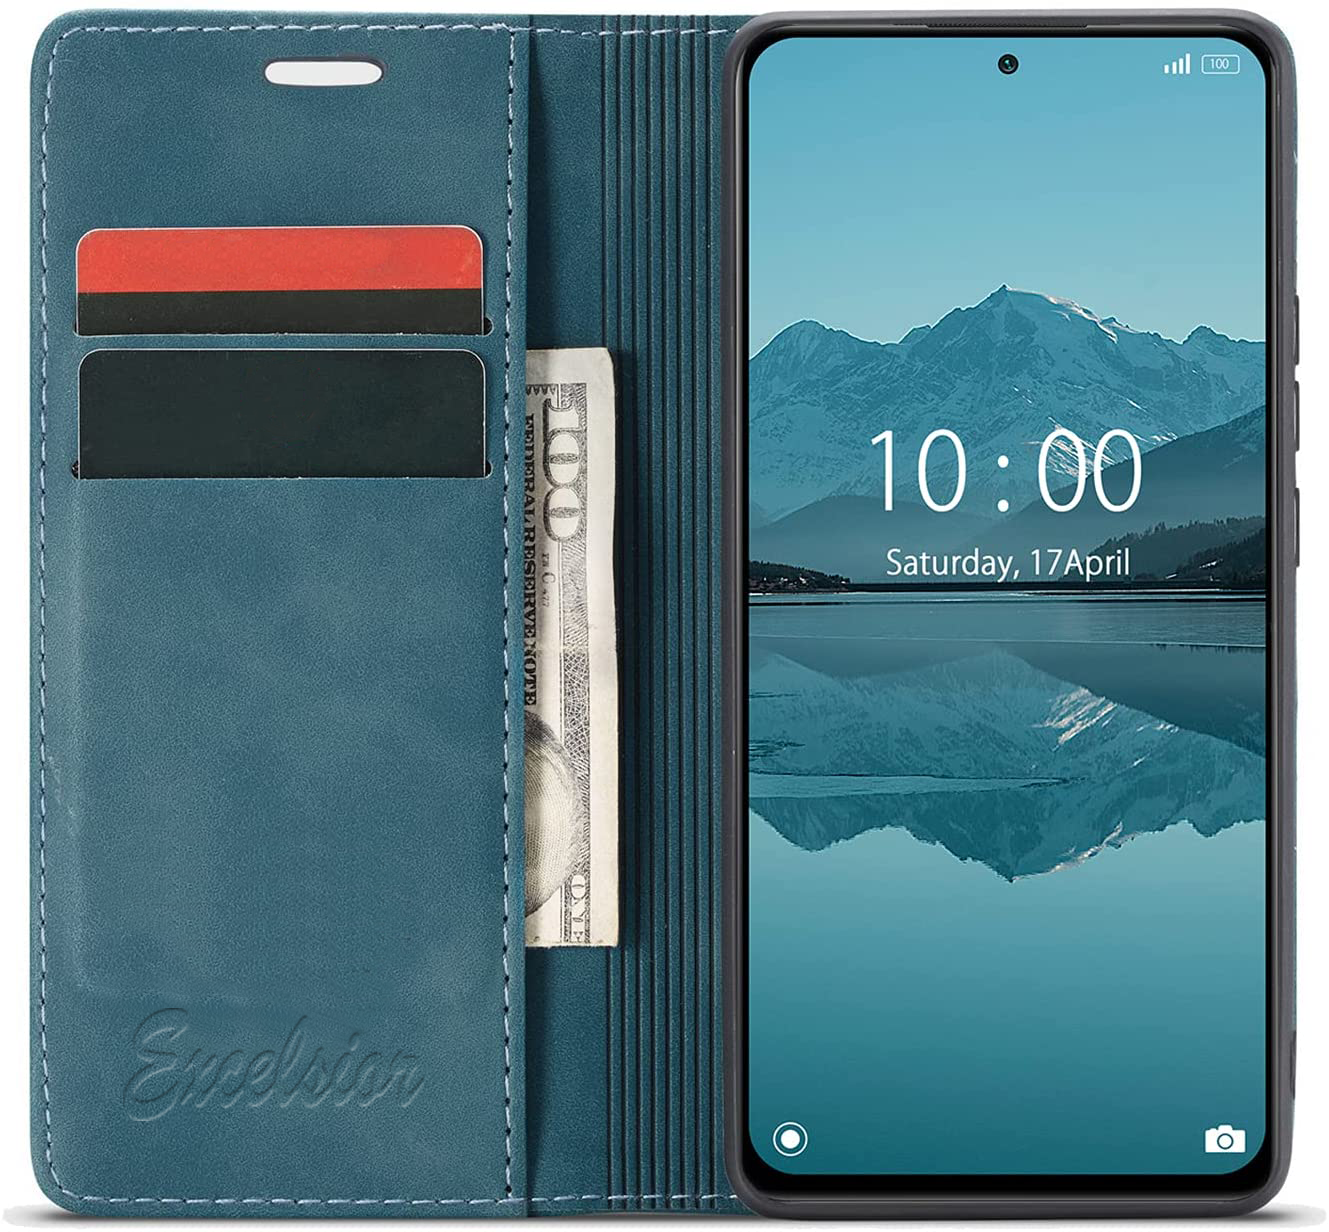 Xiaomi Redmi Note 10 Pro Max Leather Wallet flip case cover with card slots by Excelsior